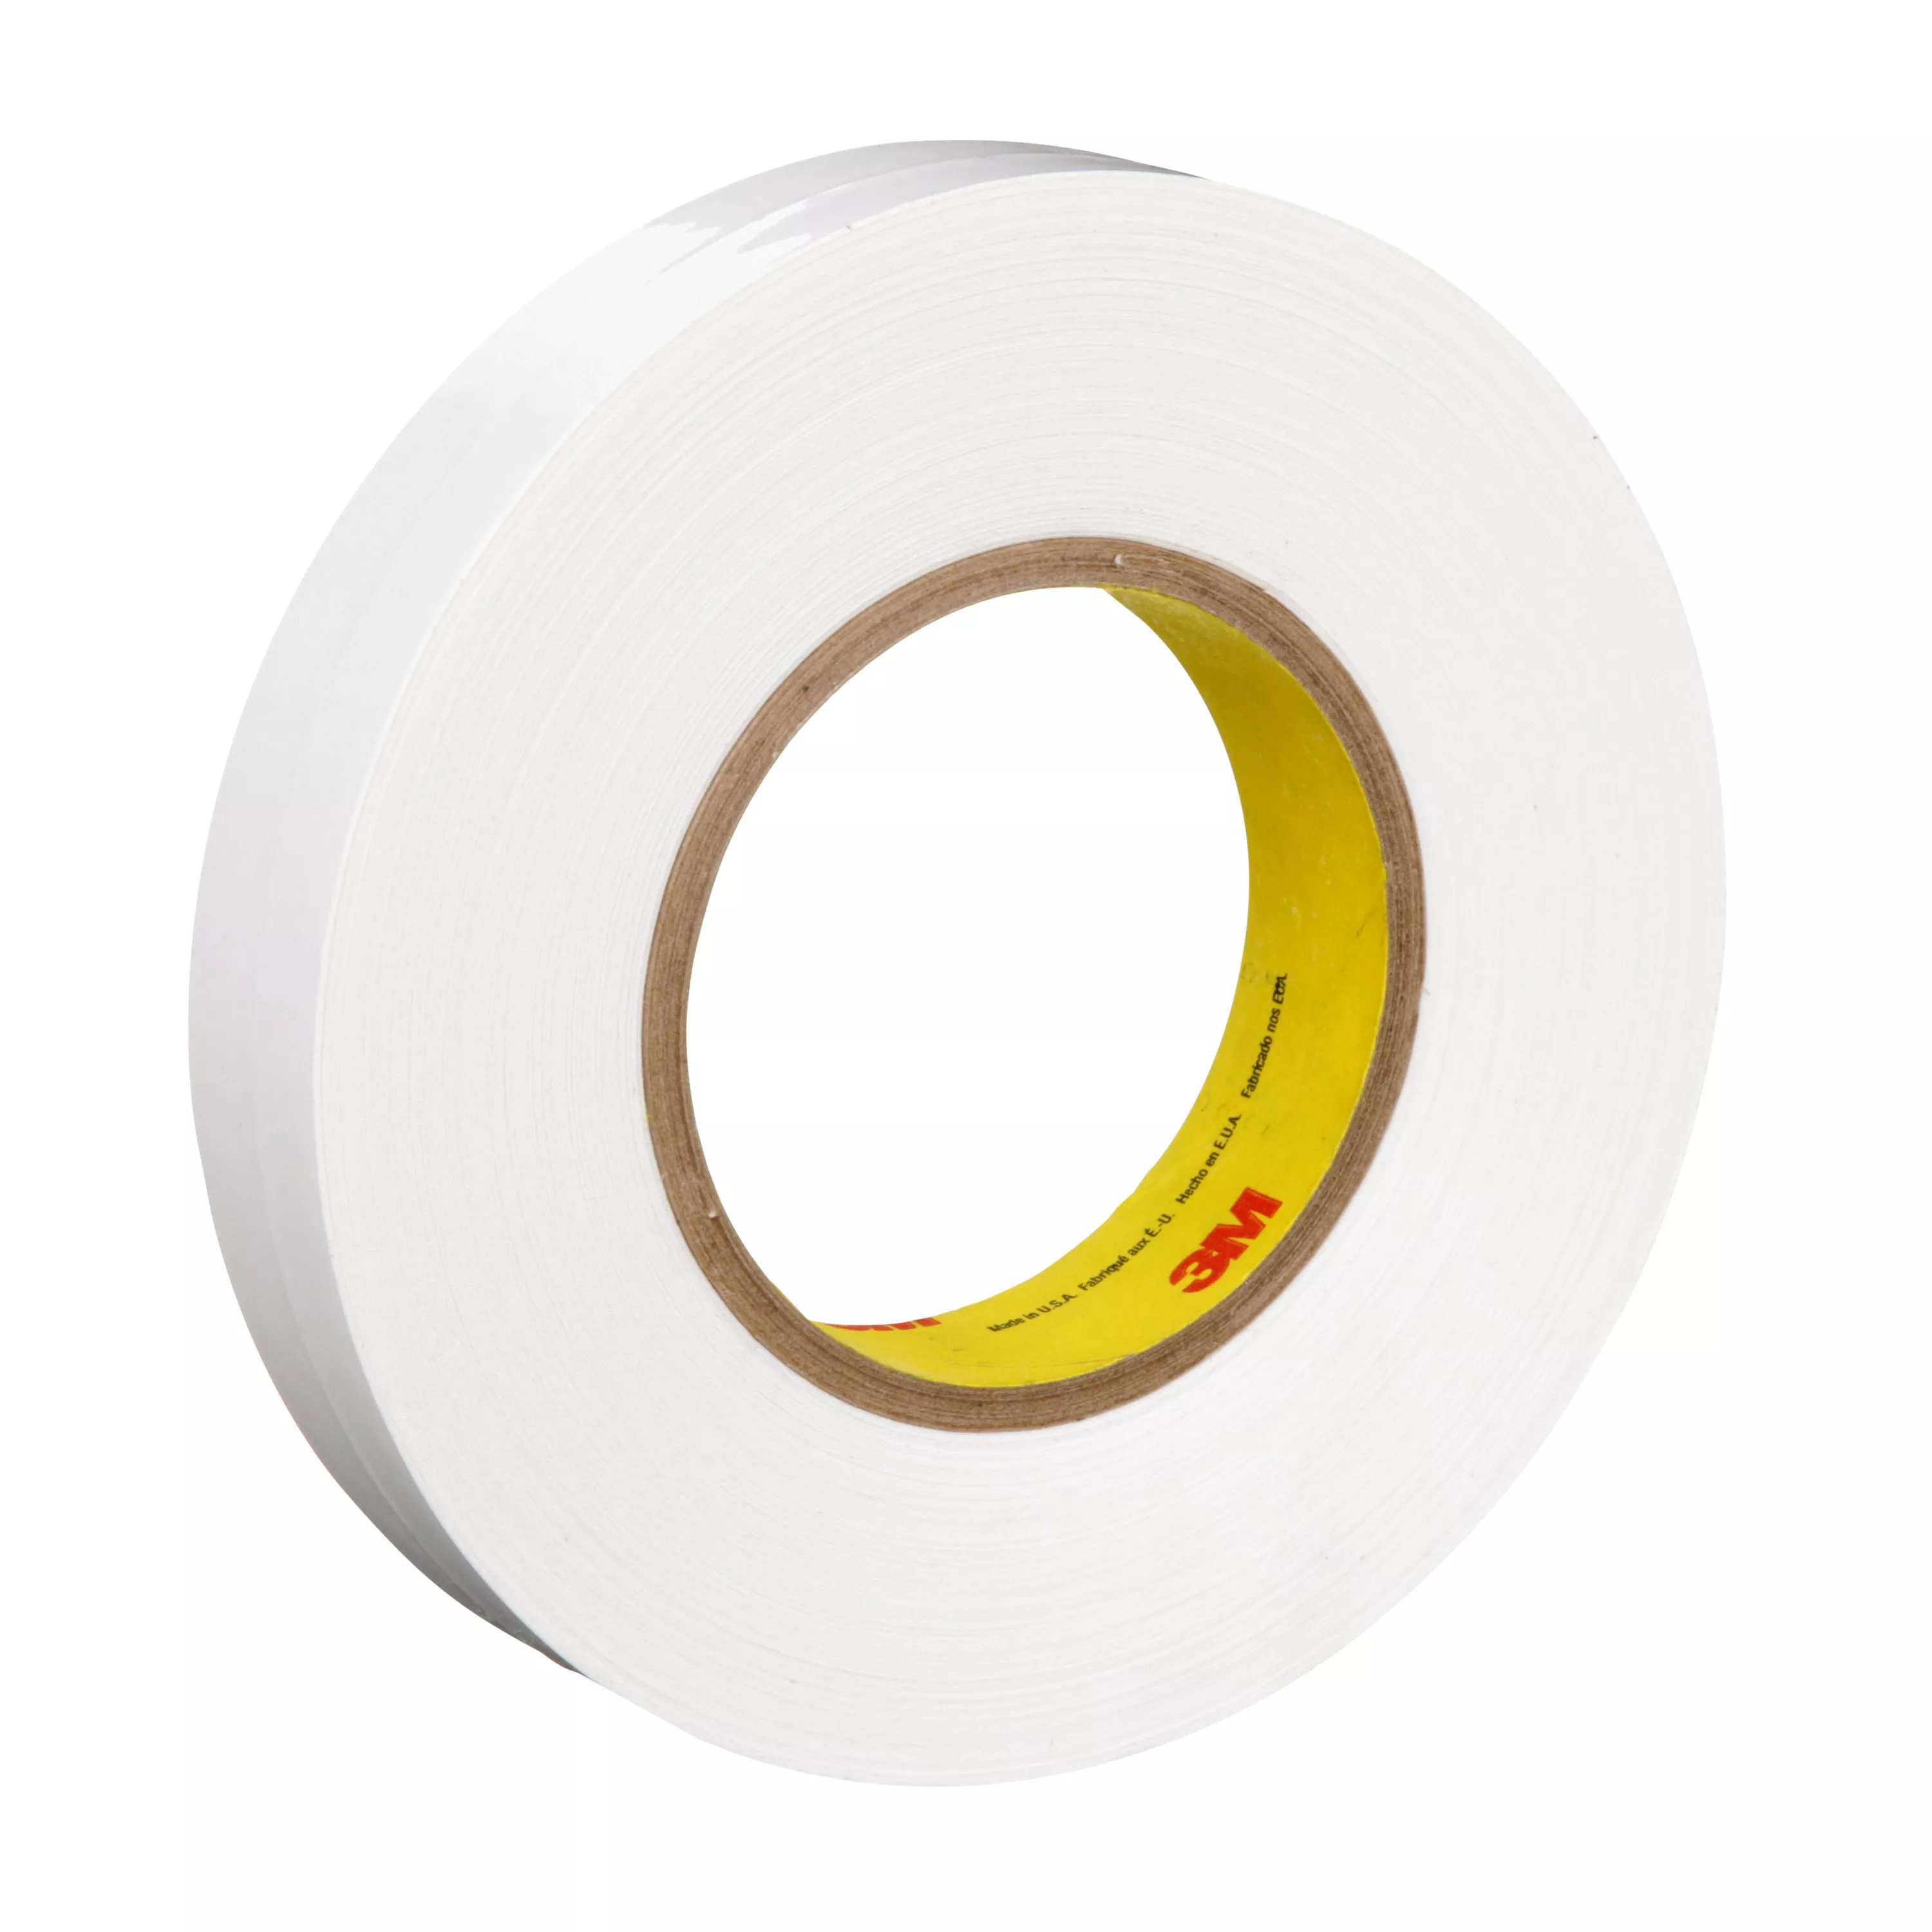 3M™ Removable Repositionable Tape 666, Clear, 1 in x 72 yd, 3.8 mil, 36
Roll/Case